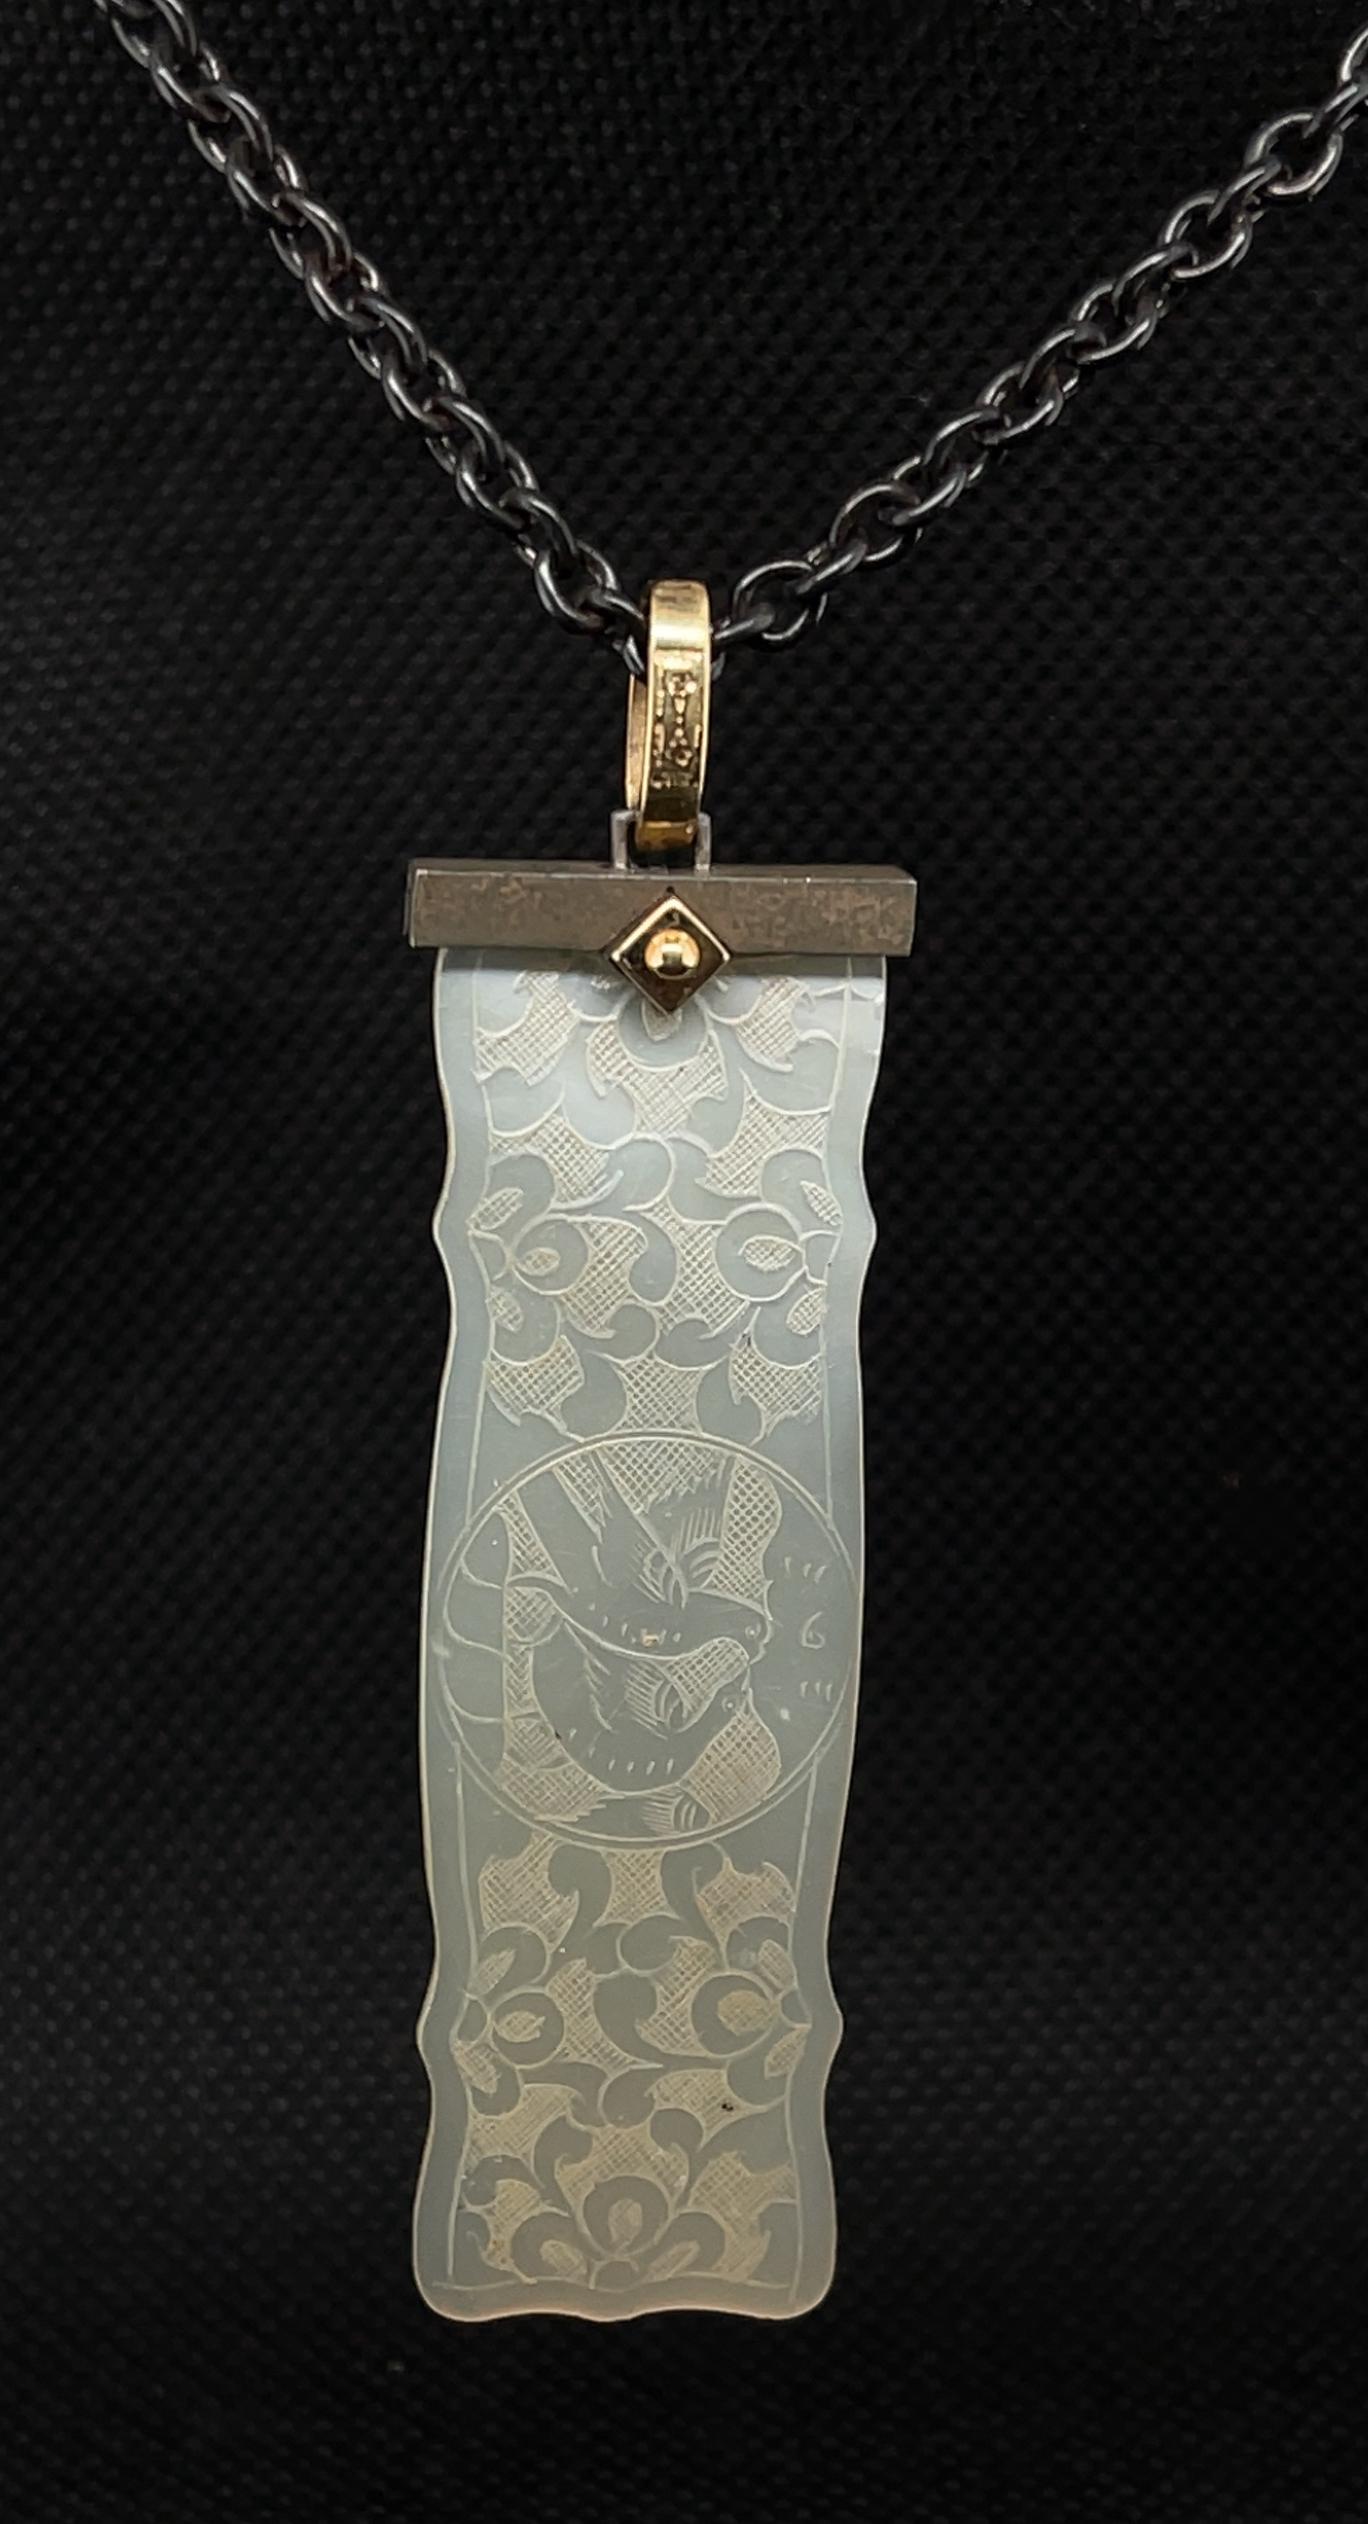 This pretty necklace features an antique, mother-of-pearl Chinese gaming counter dating back to the 18th Century. The elongated rectangular gambling 